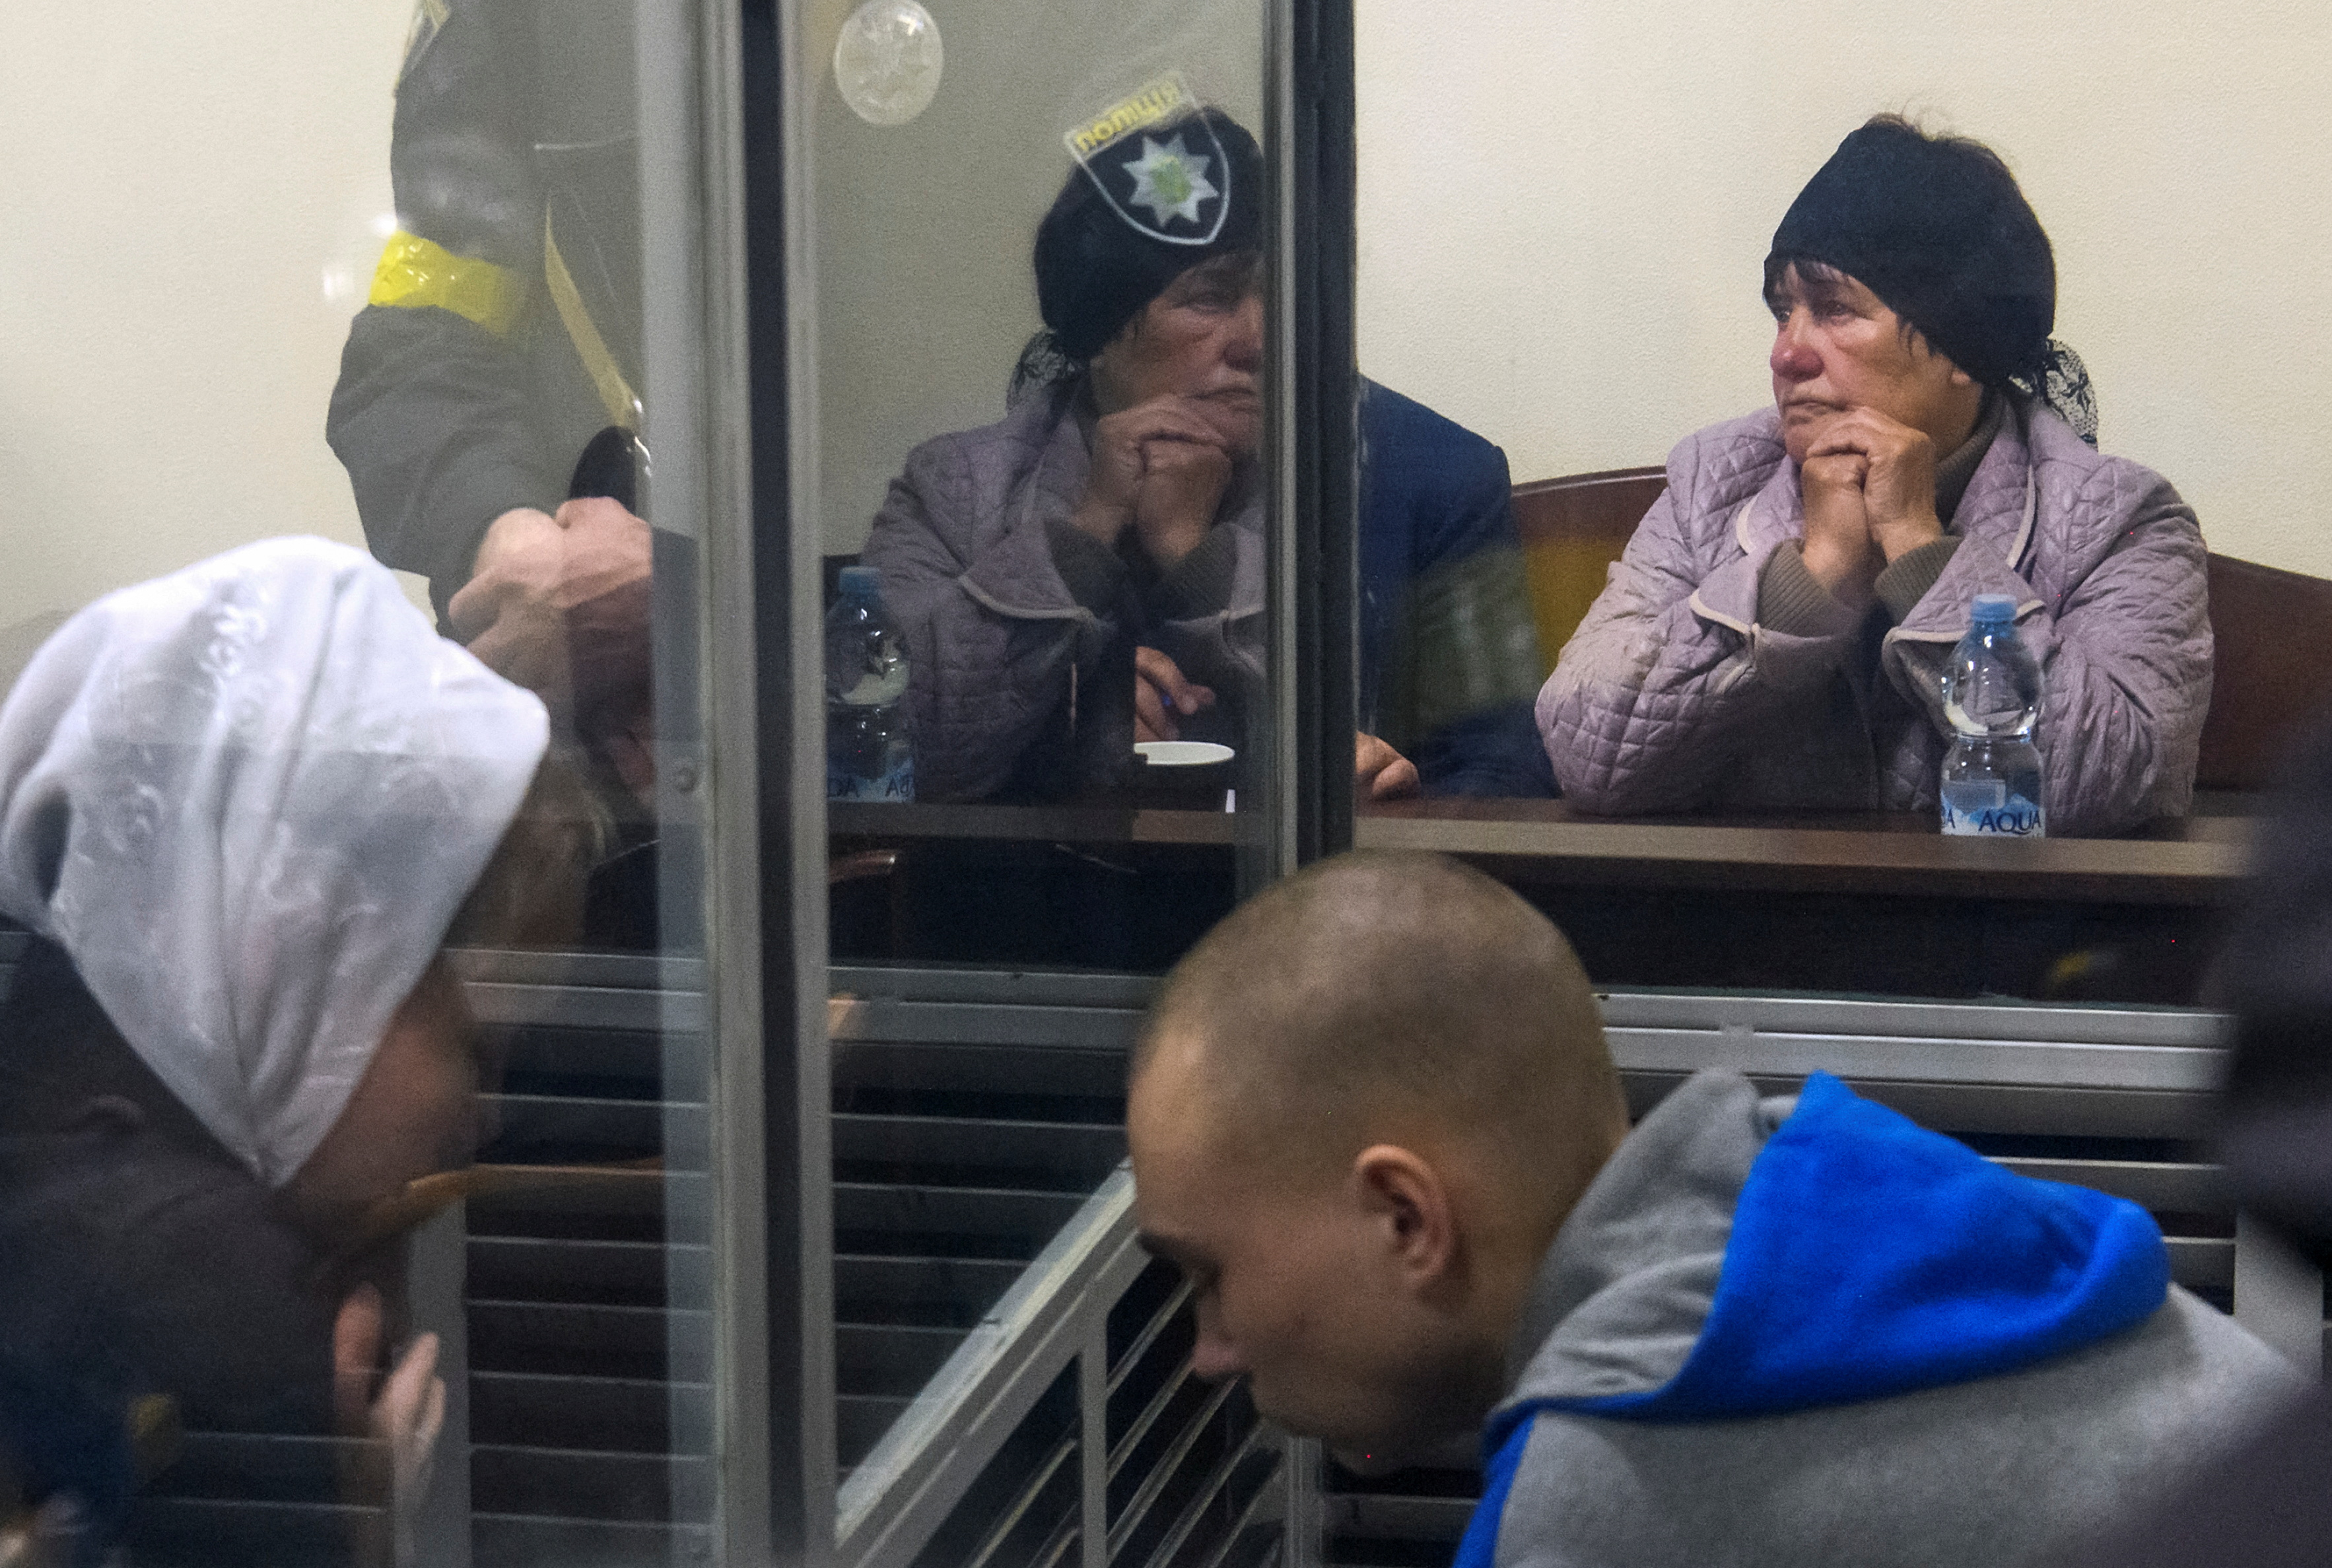 Russian soldier Shishimarin attends a court hearing in Kyiv